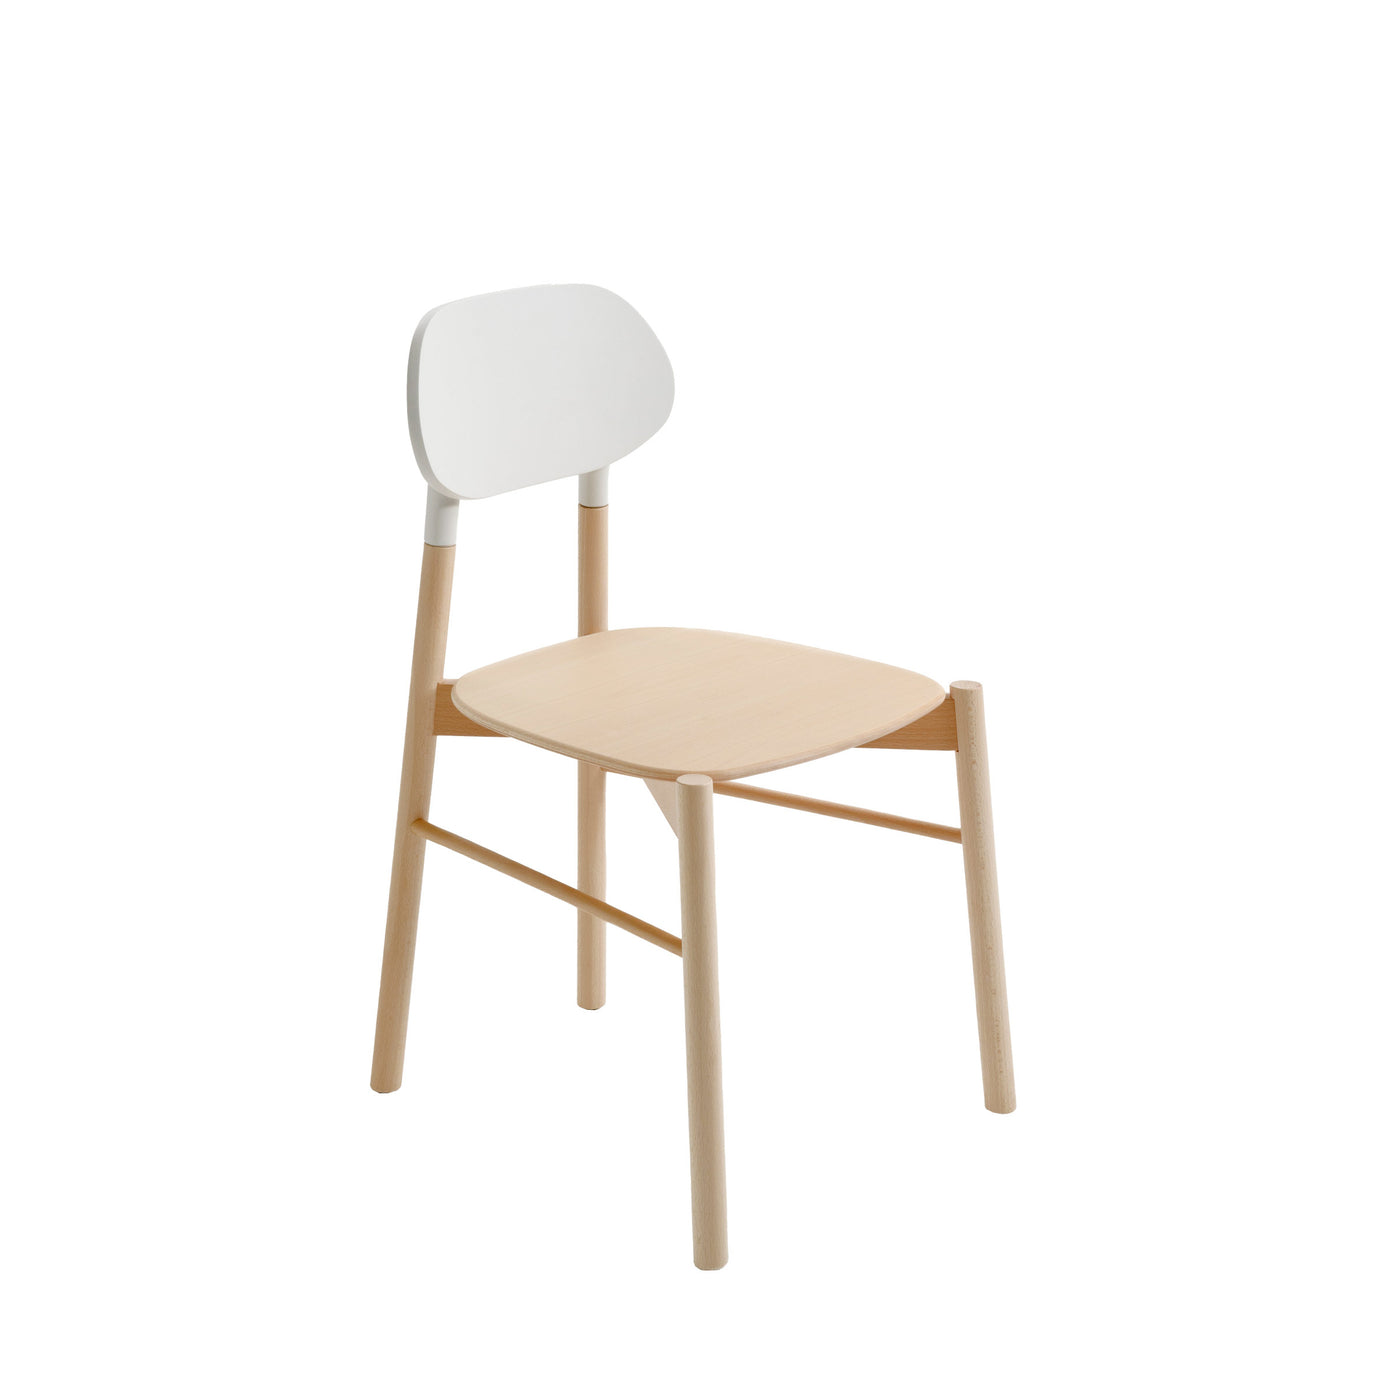 Wood Dining Chair BOKKEN by Bellavista + Piccini for Colé Italia 03